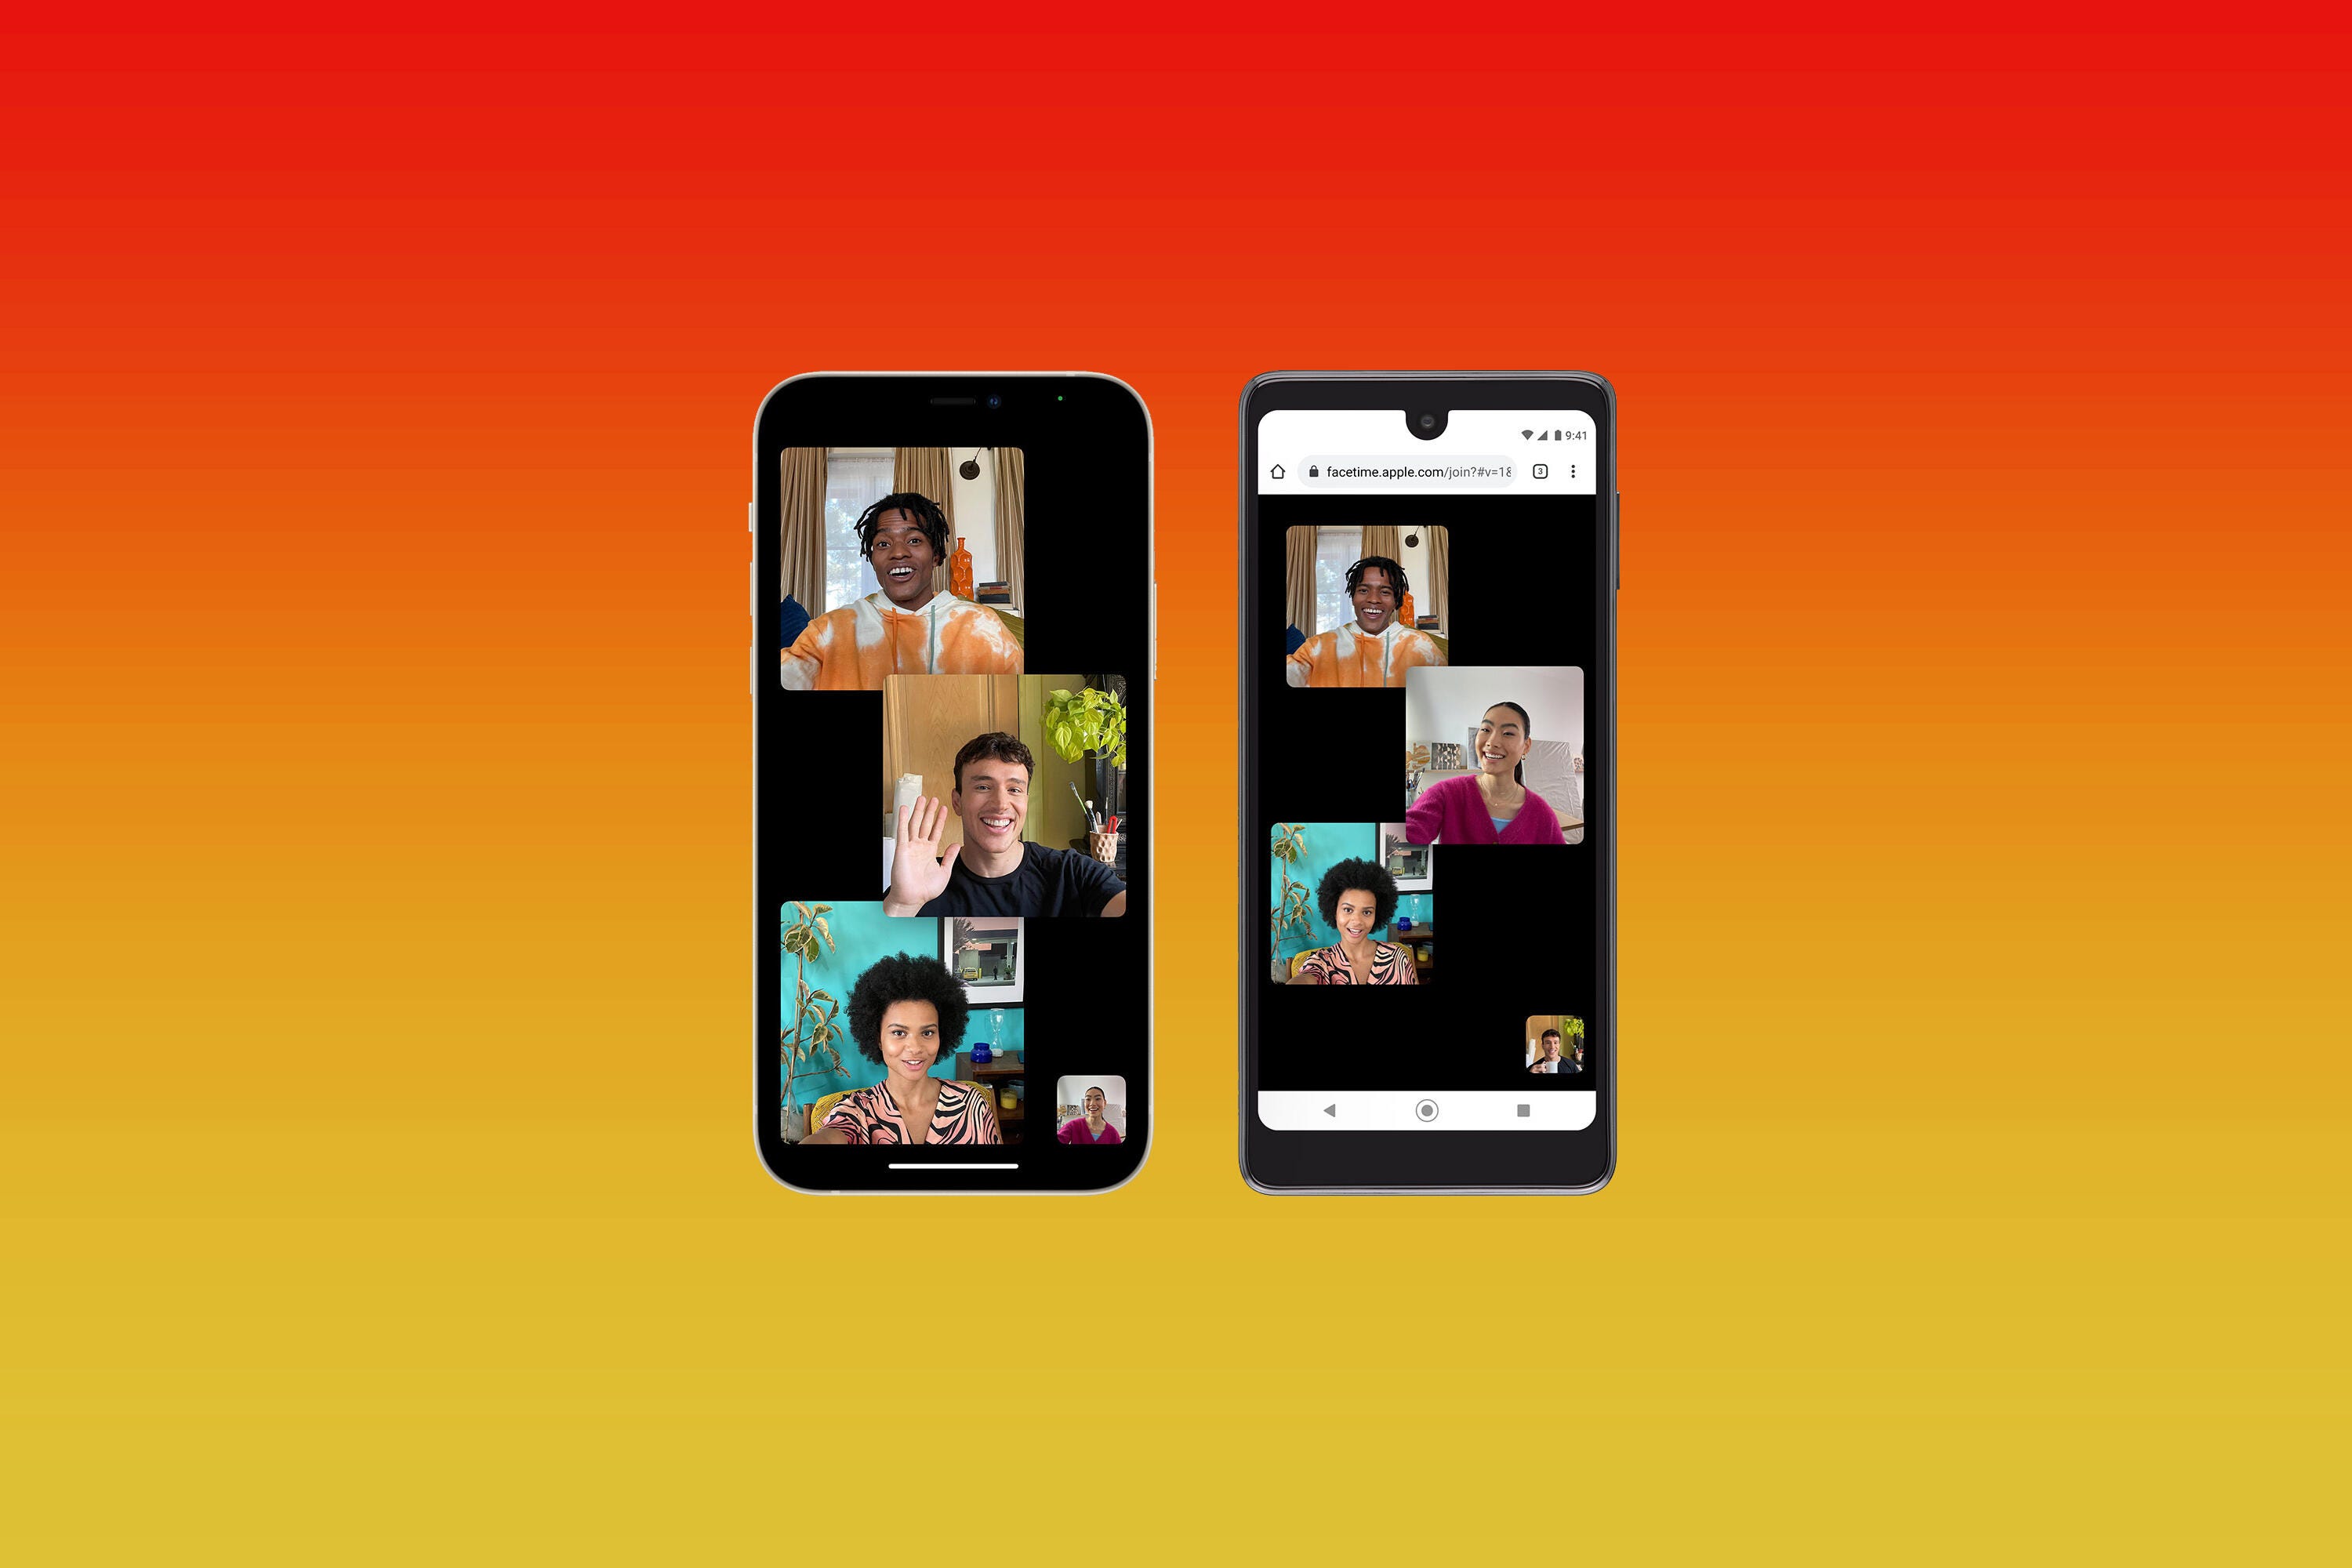 iOS 15 makes it easy to FaceTime between Android and iPhone. Here’s how to try it now